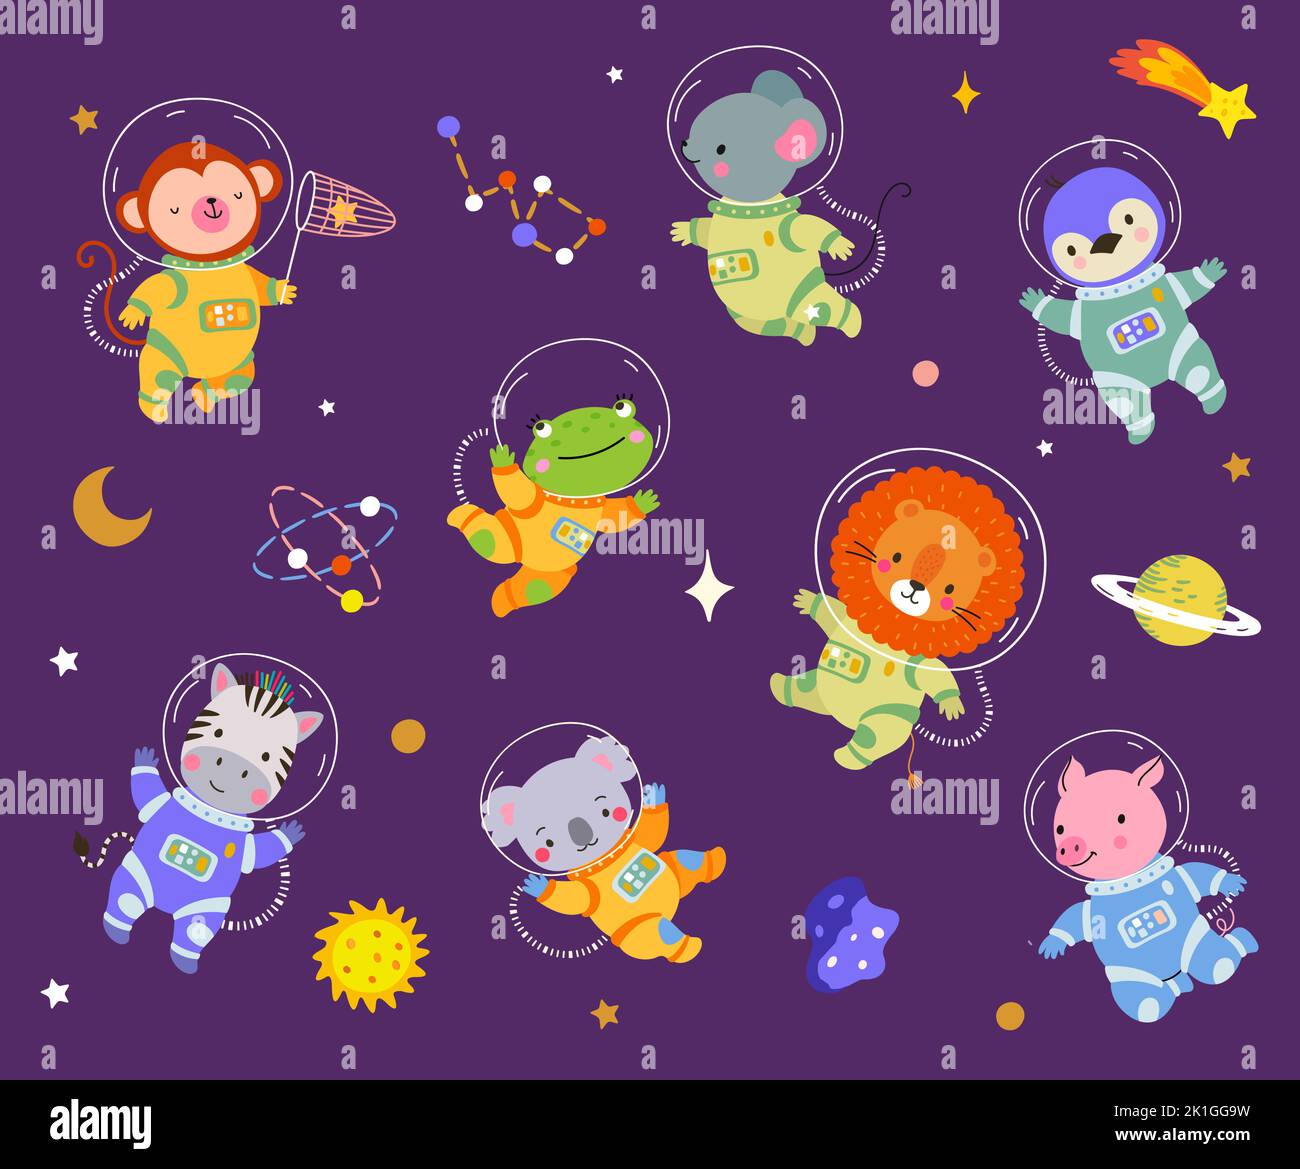 Monkey planet Stock Vector Images - Alamy